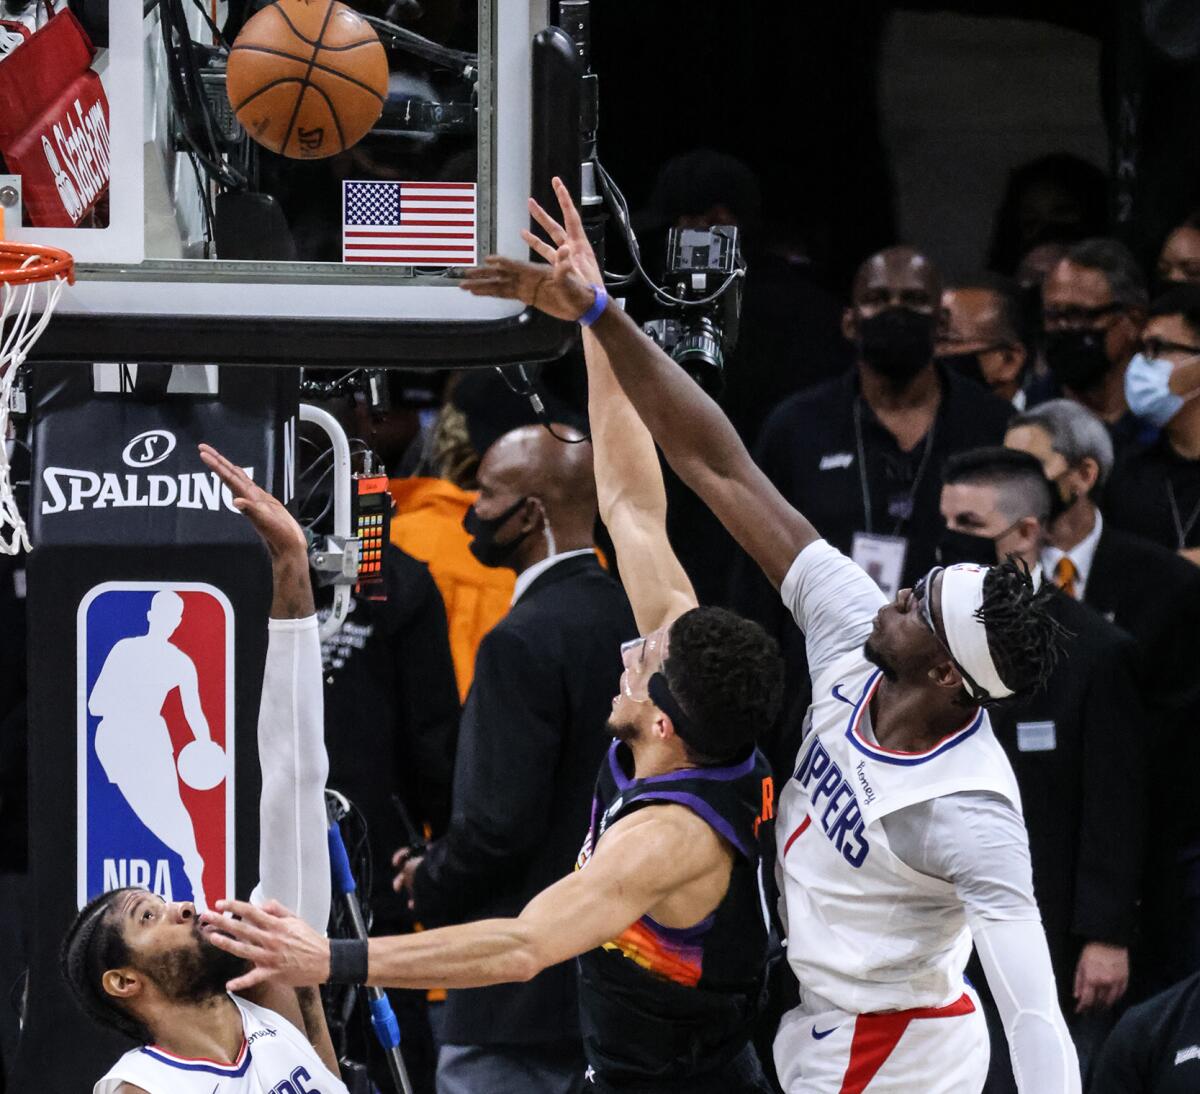 Clippers guard Reggie Jackson, right, blocks a shot by Suns guard Devin Booker during Game 5 on Monday night in Phoenix.